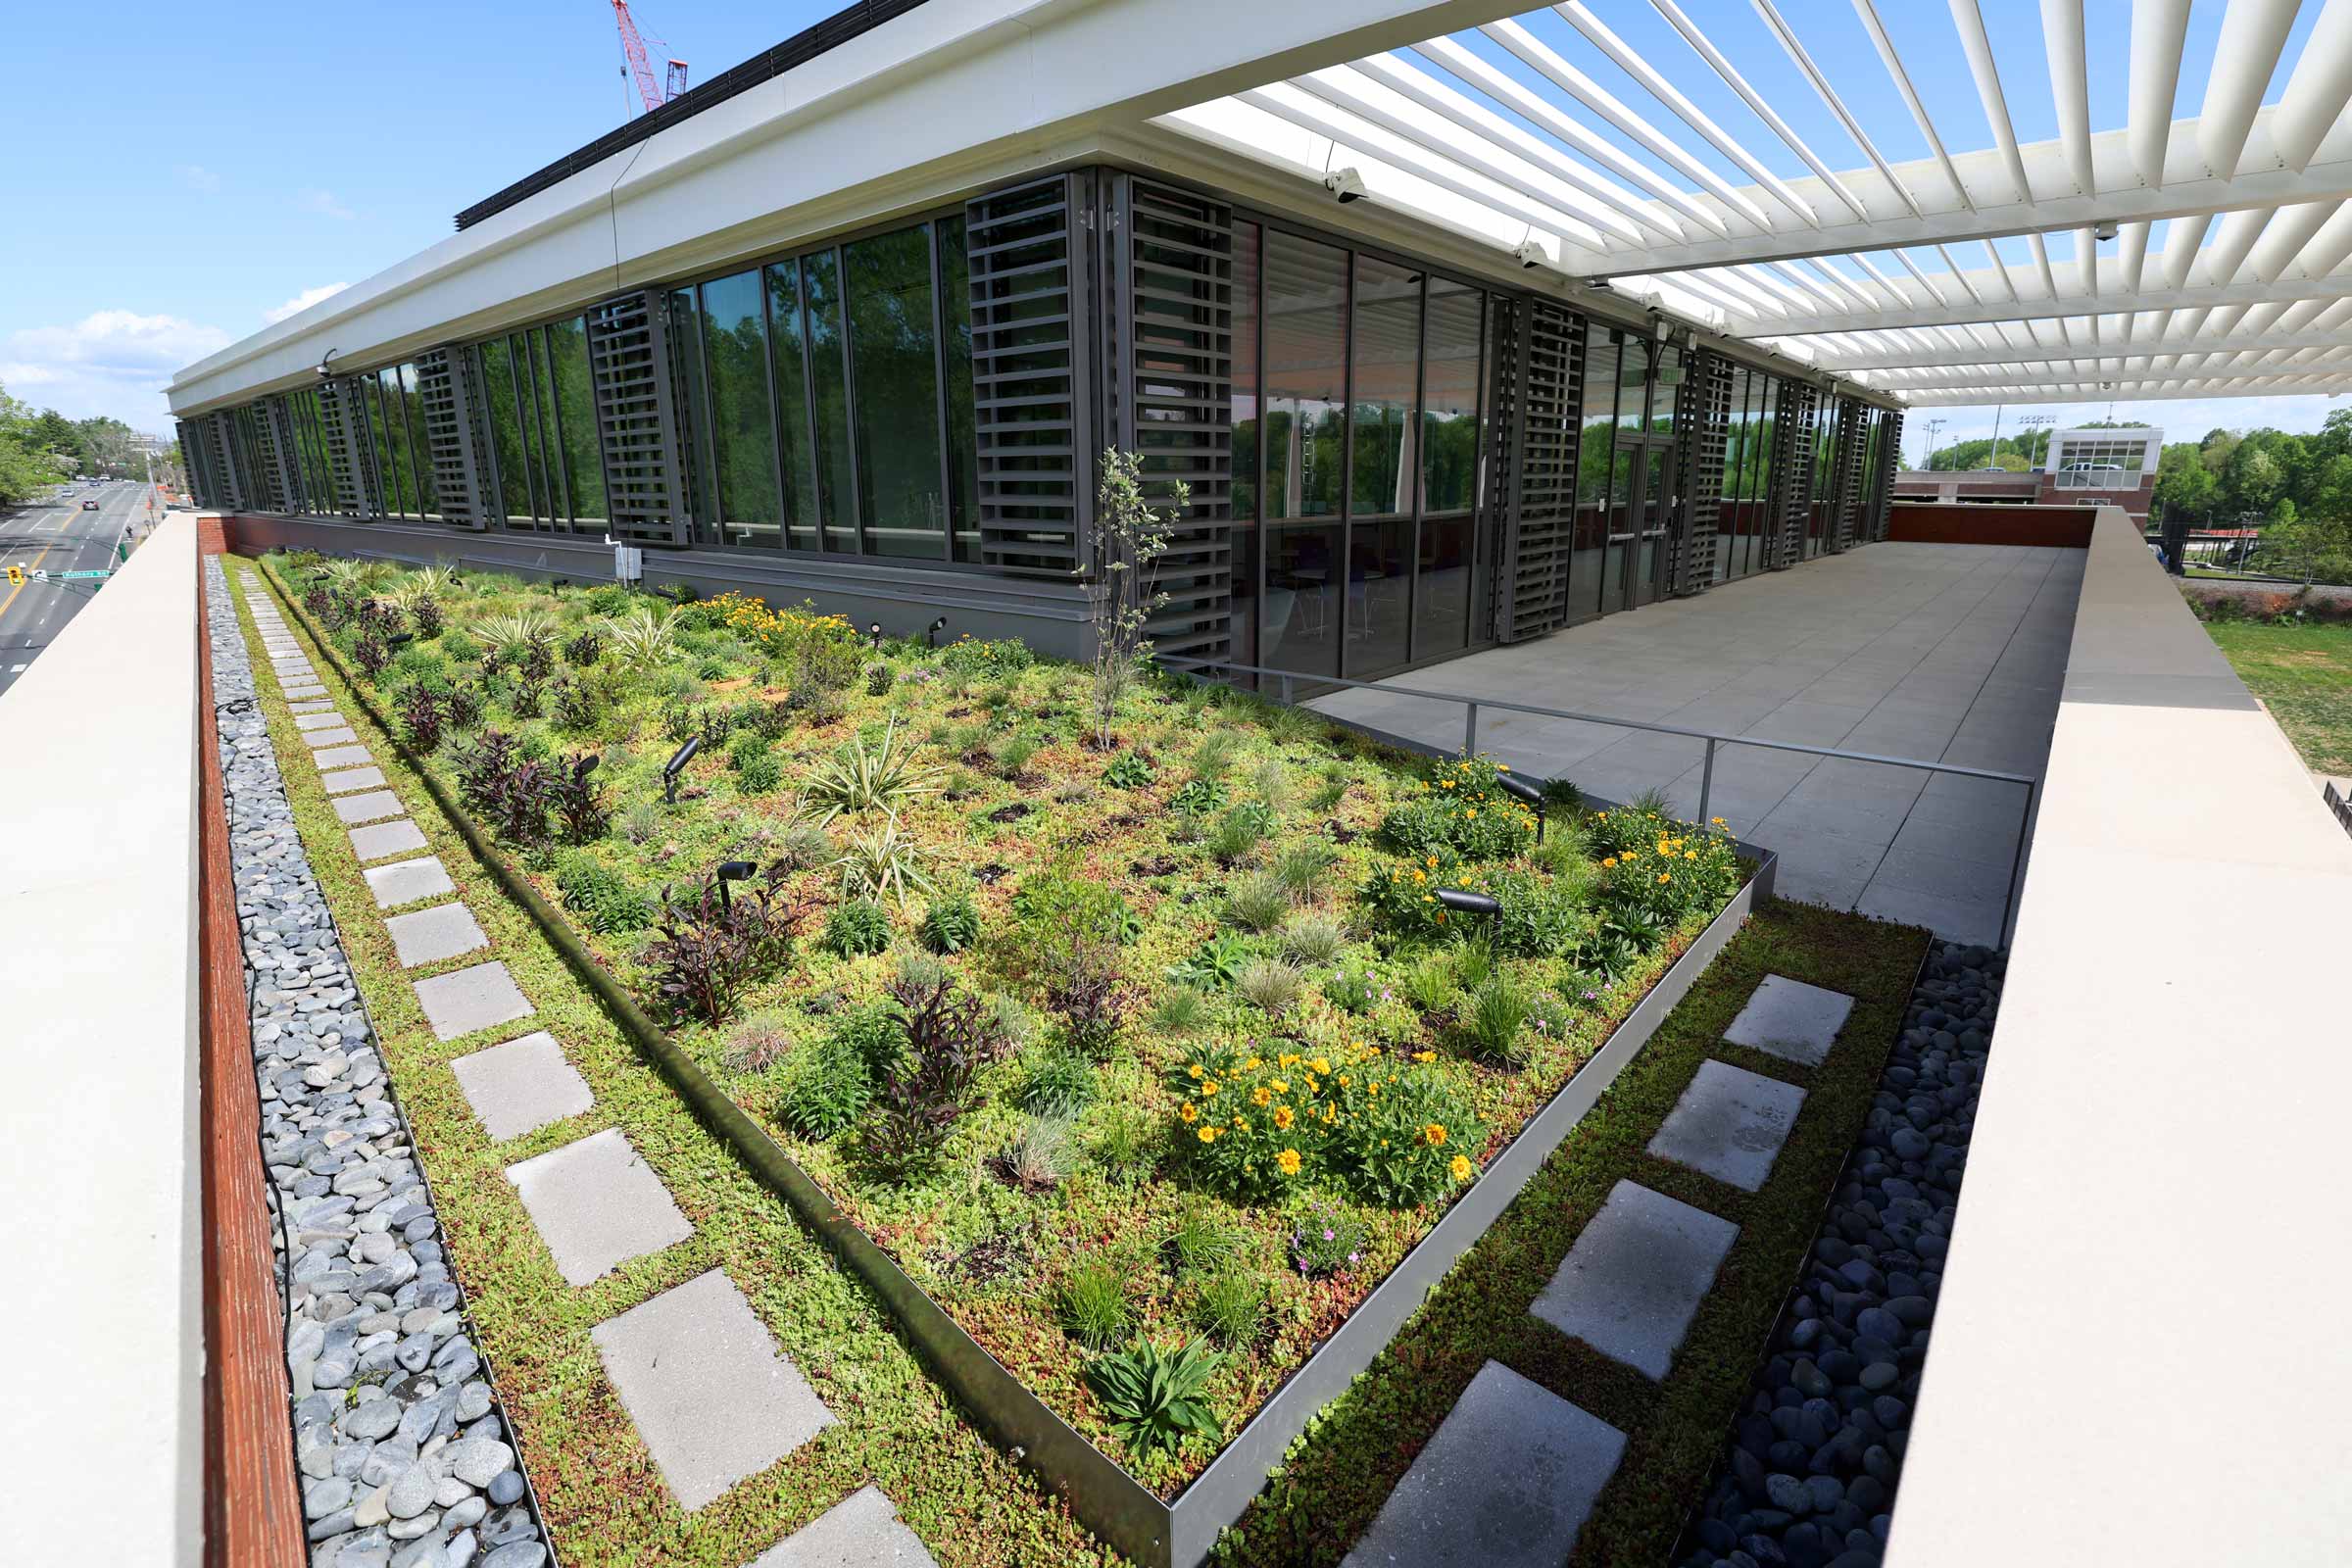 A garden added to the upper level of the new building